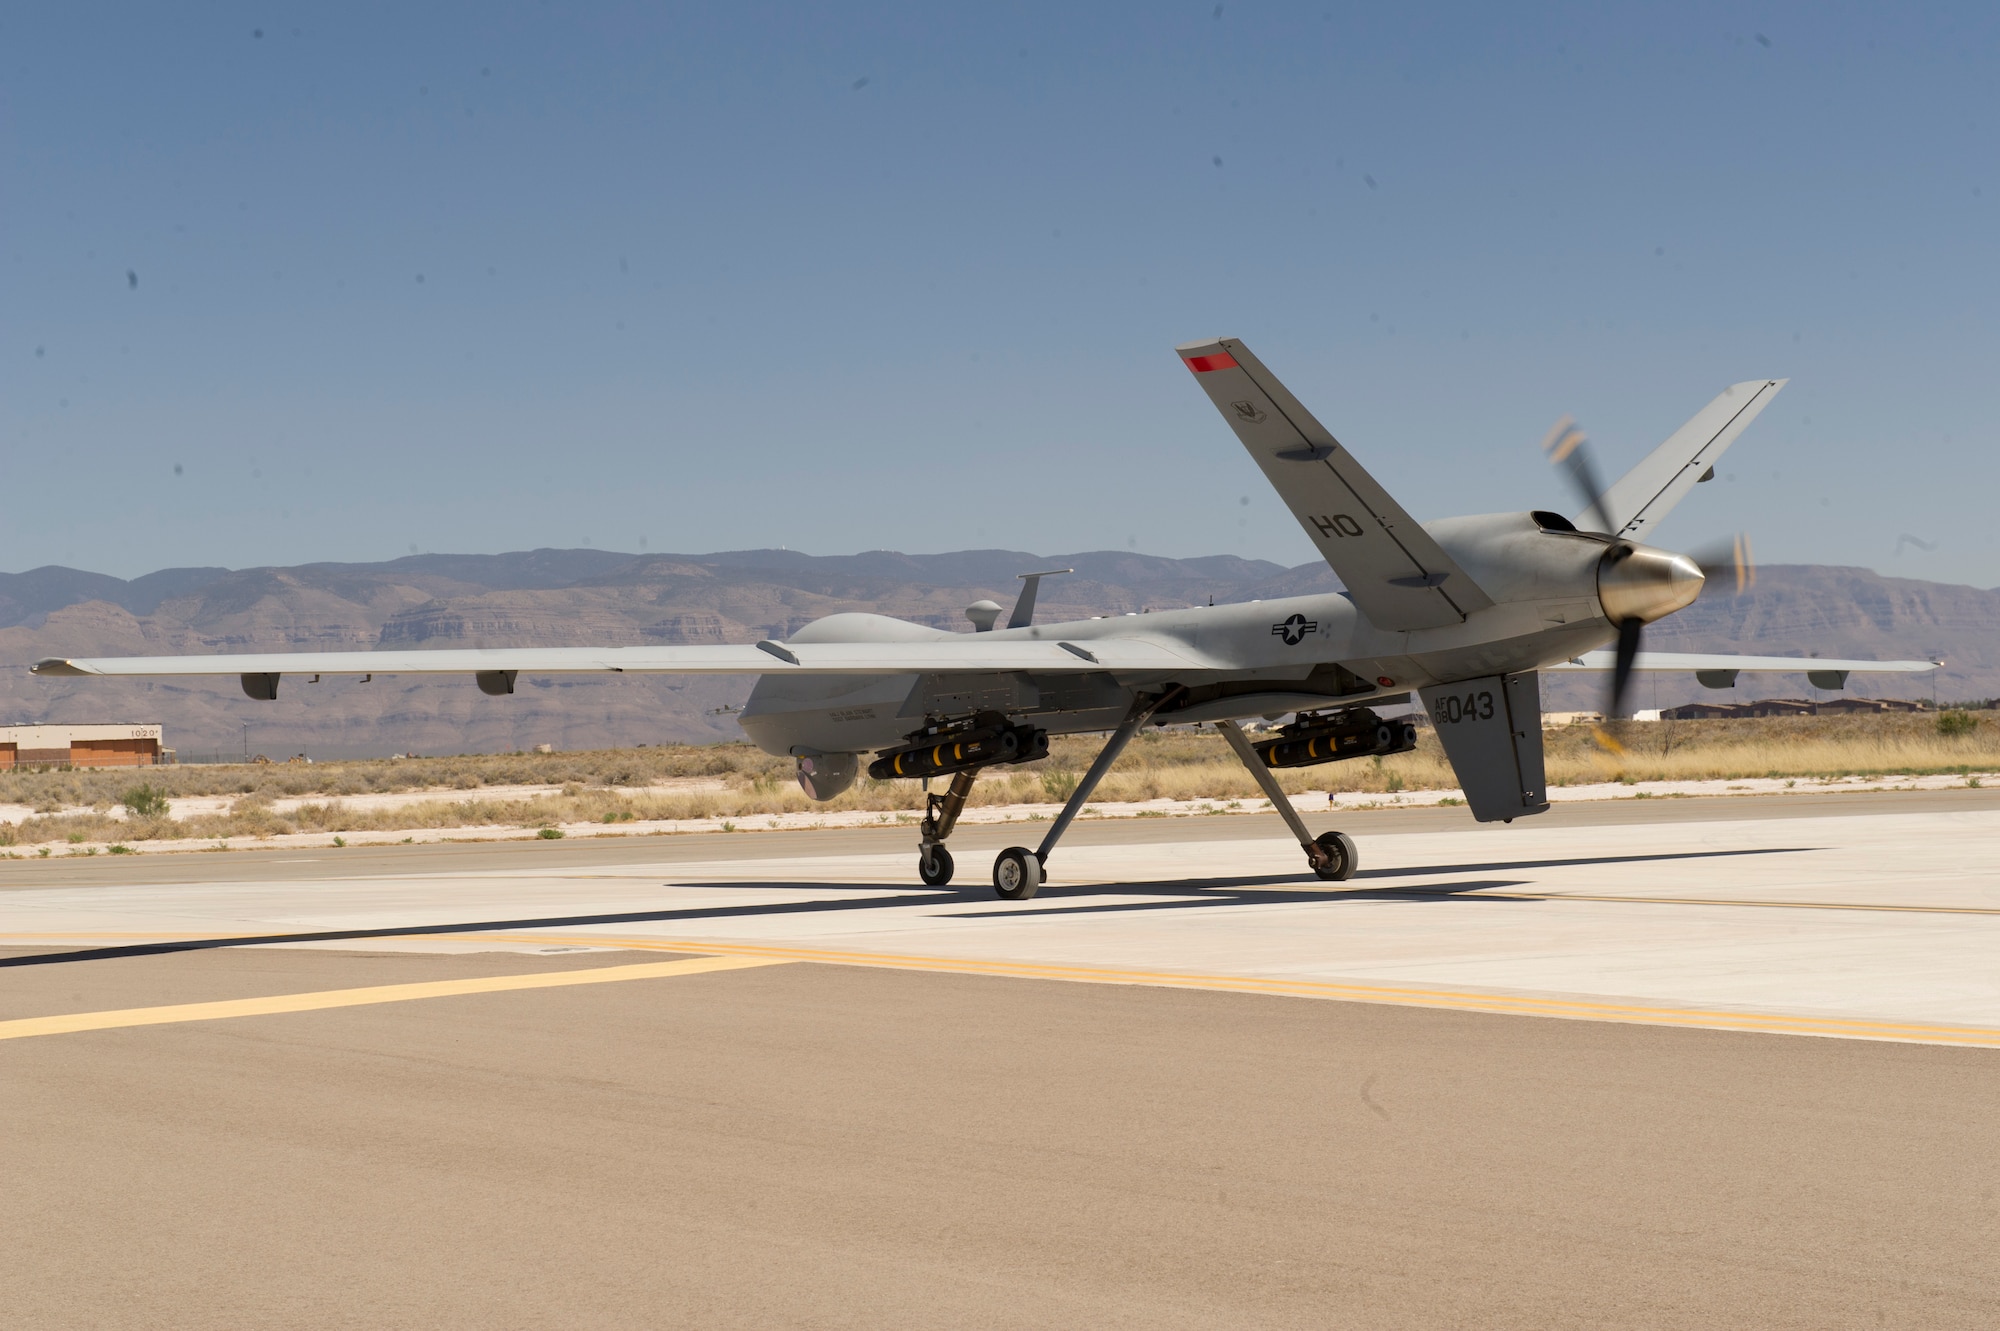 An MQ-9 Reaper prepares to take off at Holloman Air Force Base, N.M., April 16. The MQ-9 Reaper was loaded with live ammunitions in preparation for real world applications. (U.S. Air Force photo by Staff Sgt. E’Lysia Wray/Released)